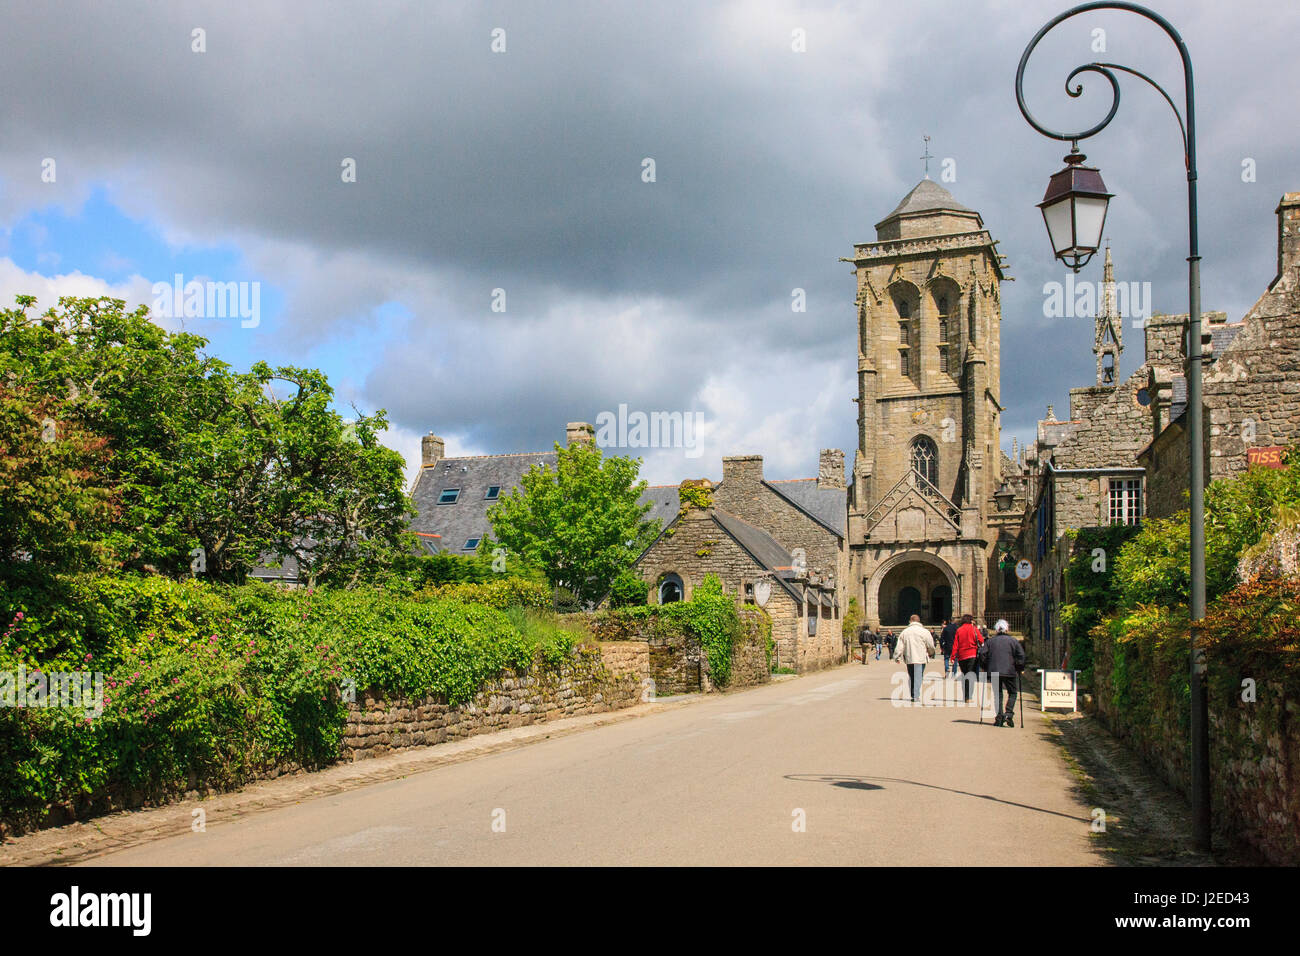 Plus Beaux Villages of France, (Most Beautiful Villages), Locronan dates back before the Dark Ages, and is named after a revered Irishman who settled here at that time. It's beauty stems from the success of the ocal weavers and merchants. Stock Photo